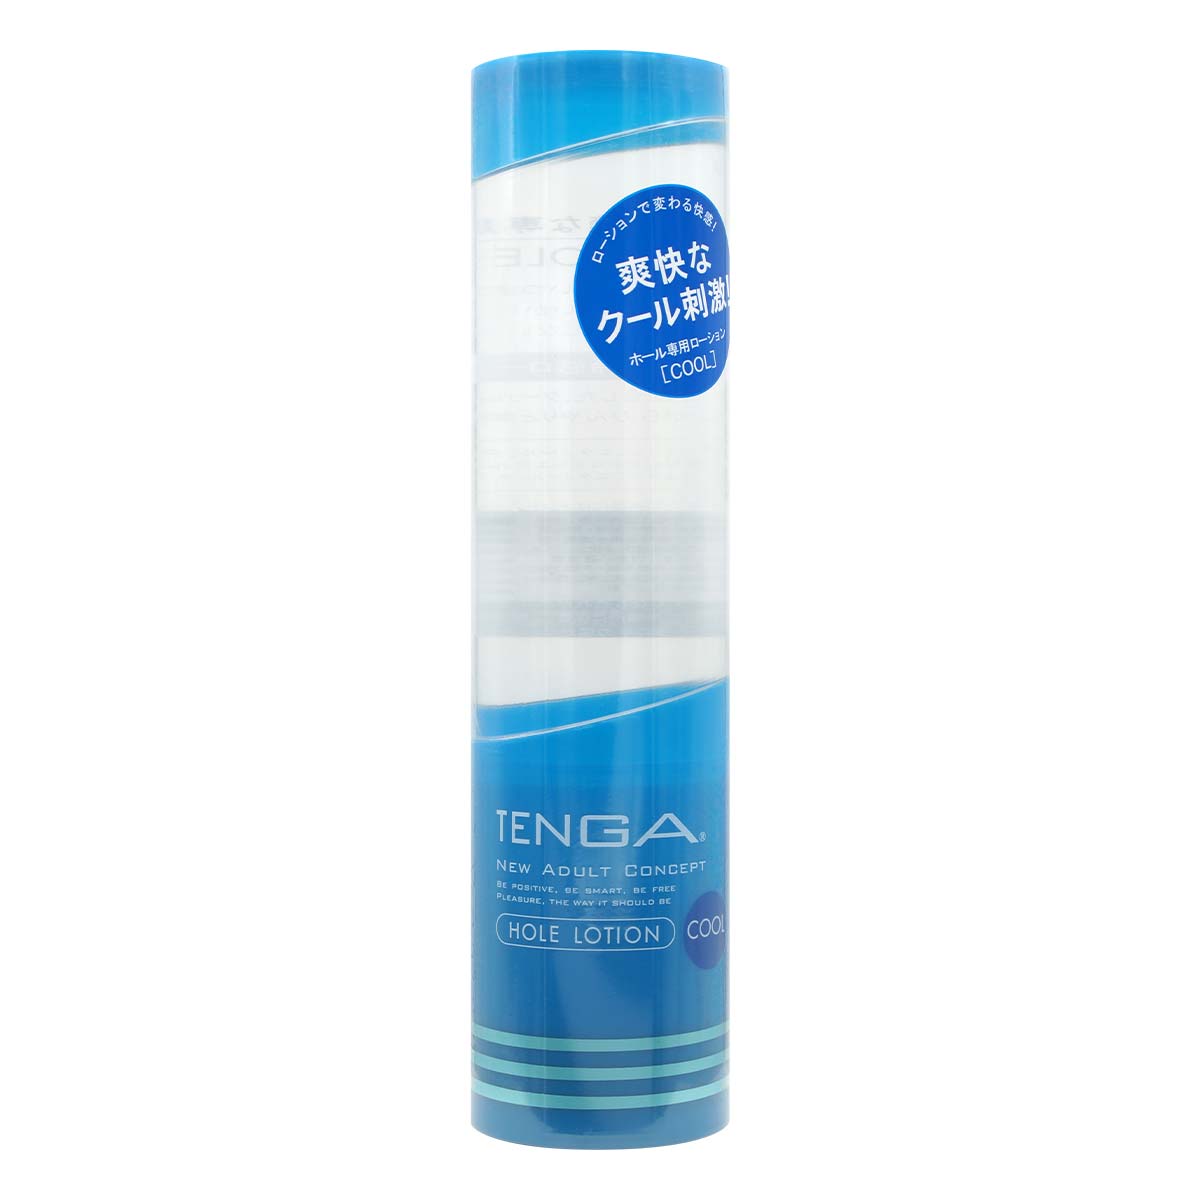 TENGA HOLE LOTION COOL 170ml Water-based Lubricant-p_2